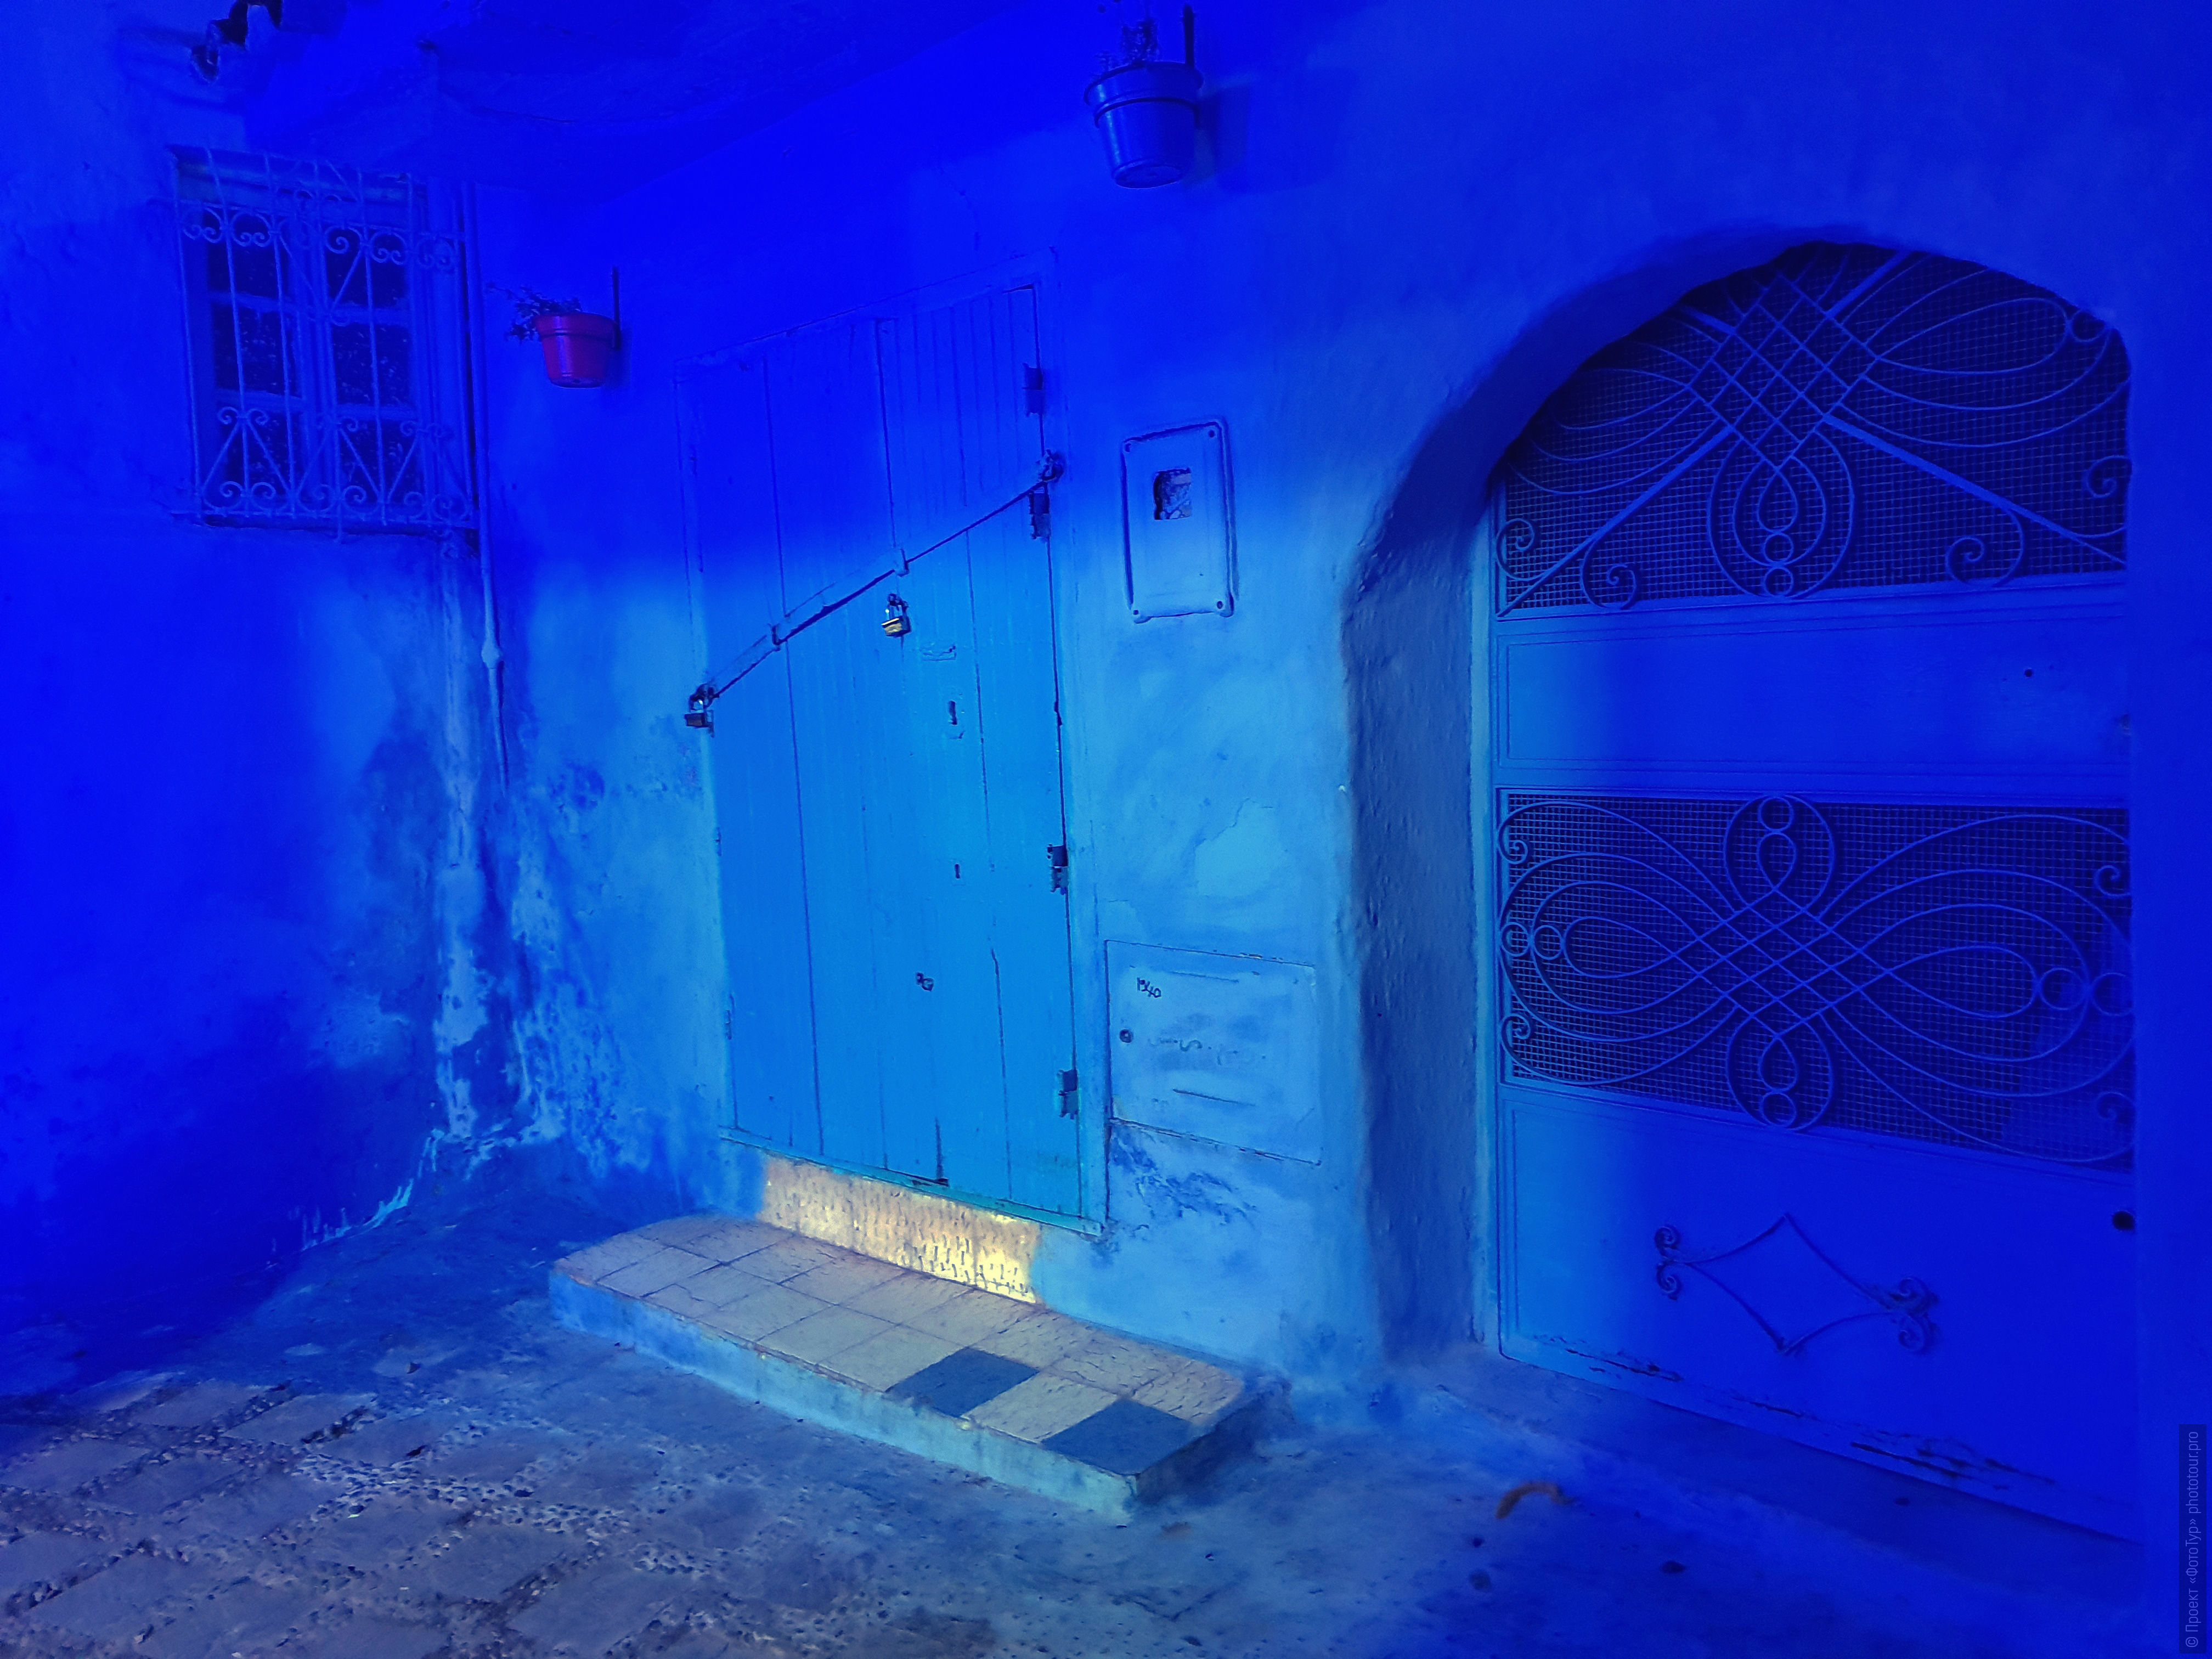 The blue of the medina of Chefchaouen, Morocco. Adventure photo tour: medina, cascades, sands and ports of Morocco, April 4 - 17, 2020.